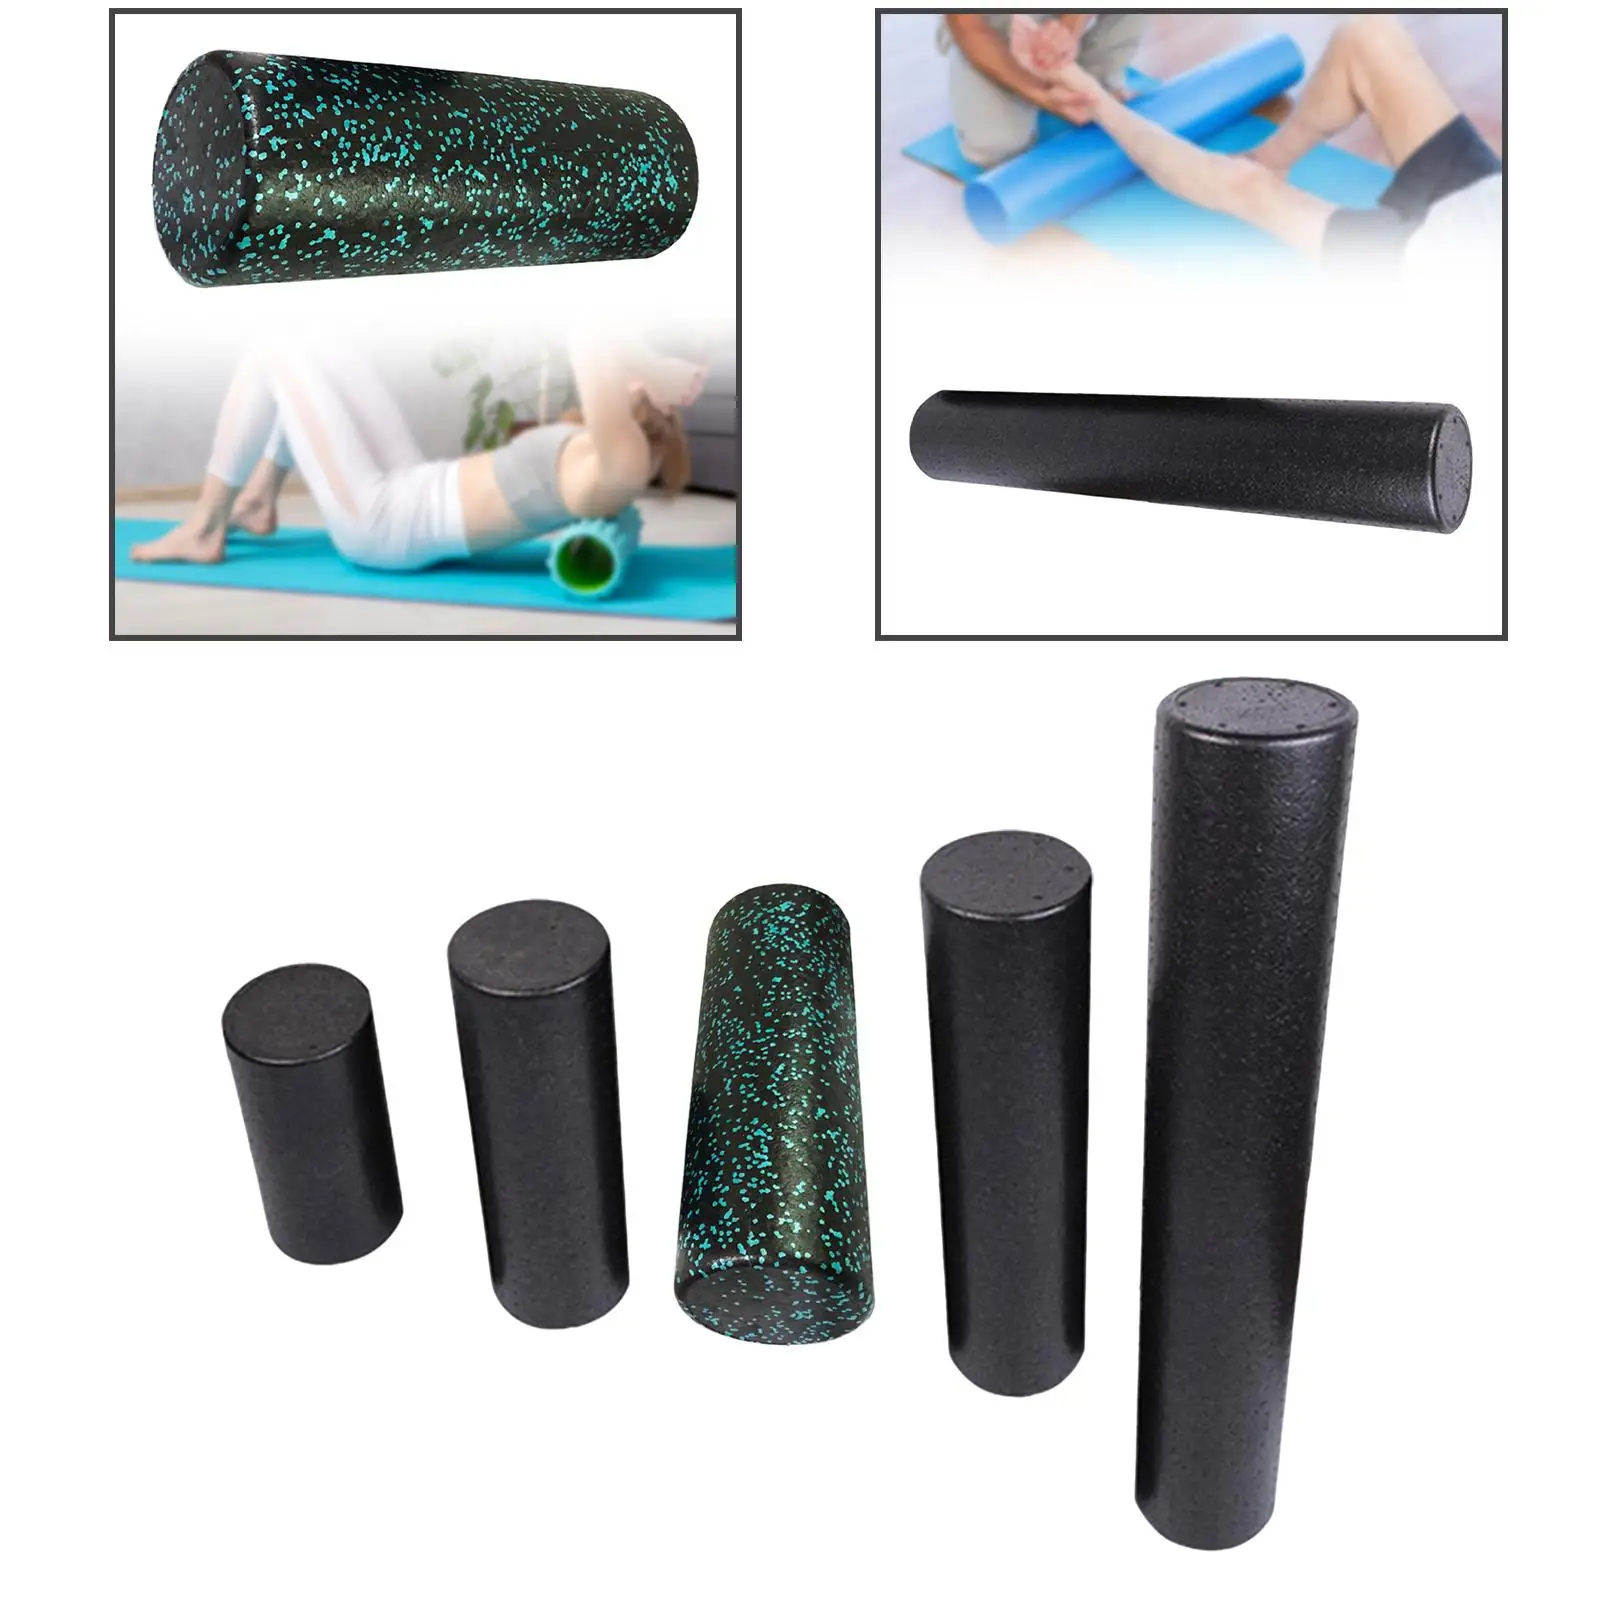 Round Foam Roller Balance Trainer for Waist Stretching Fitness Home Gym